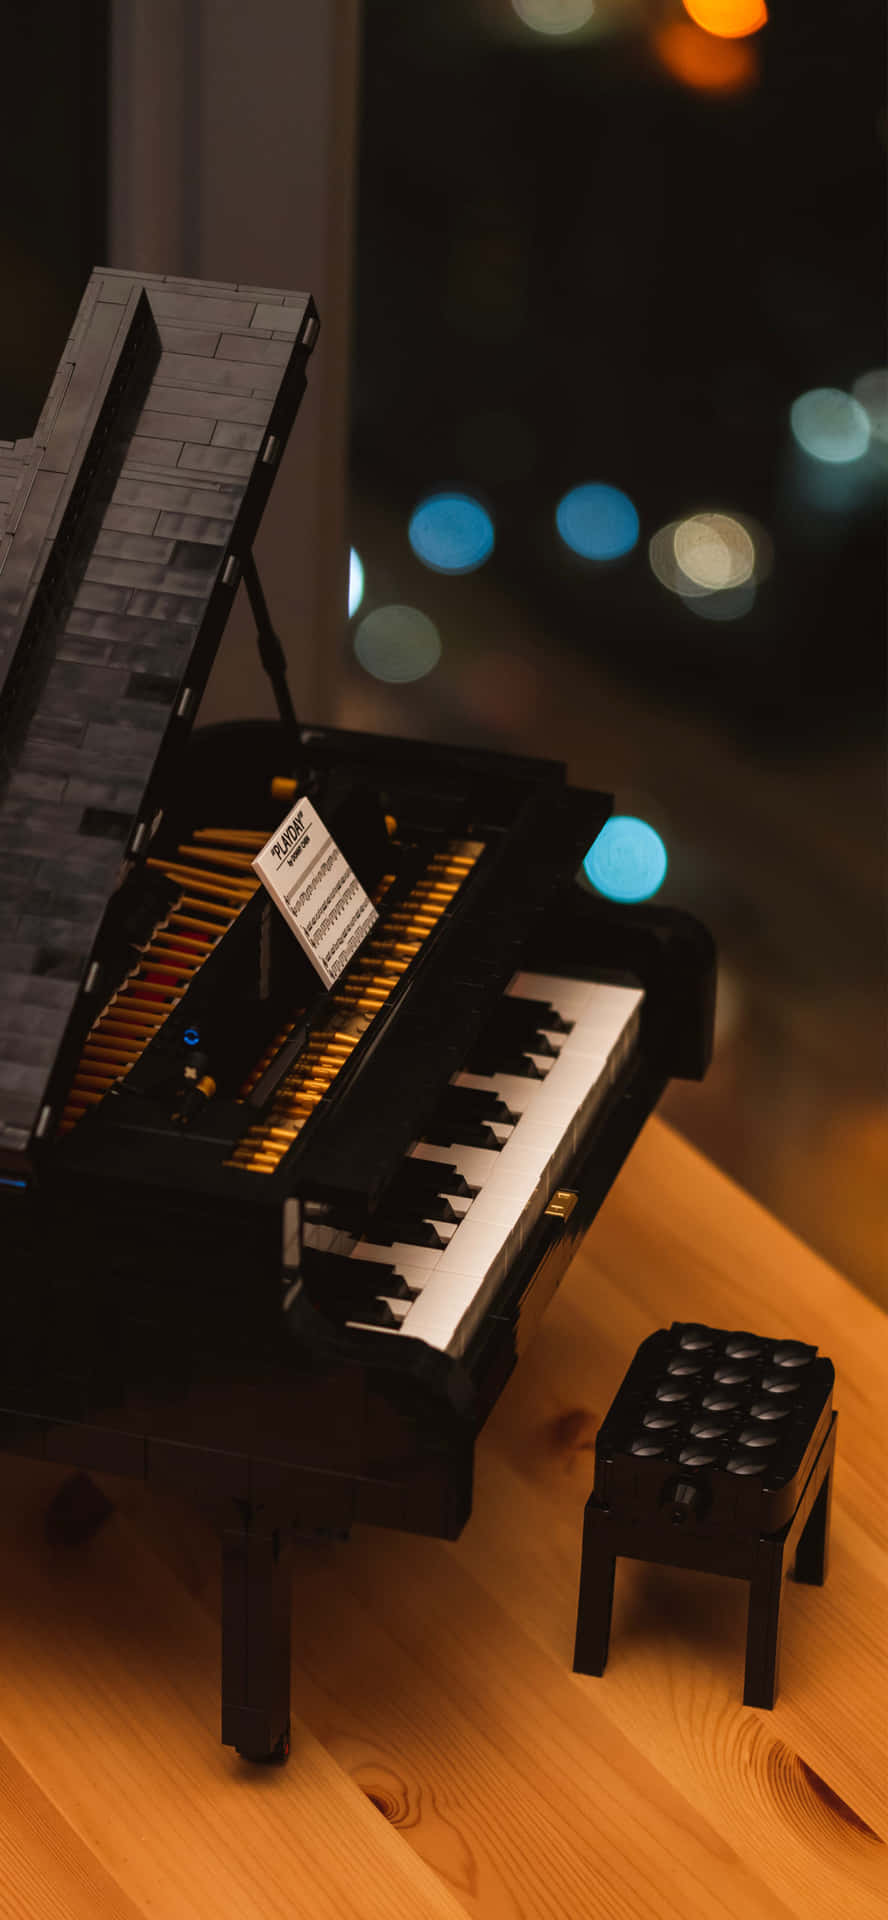 A Lego Piano Sitting On A Table With A Stool